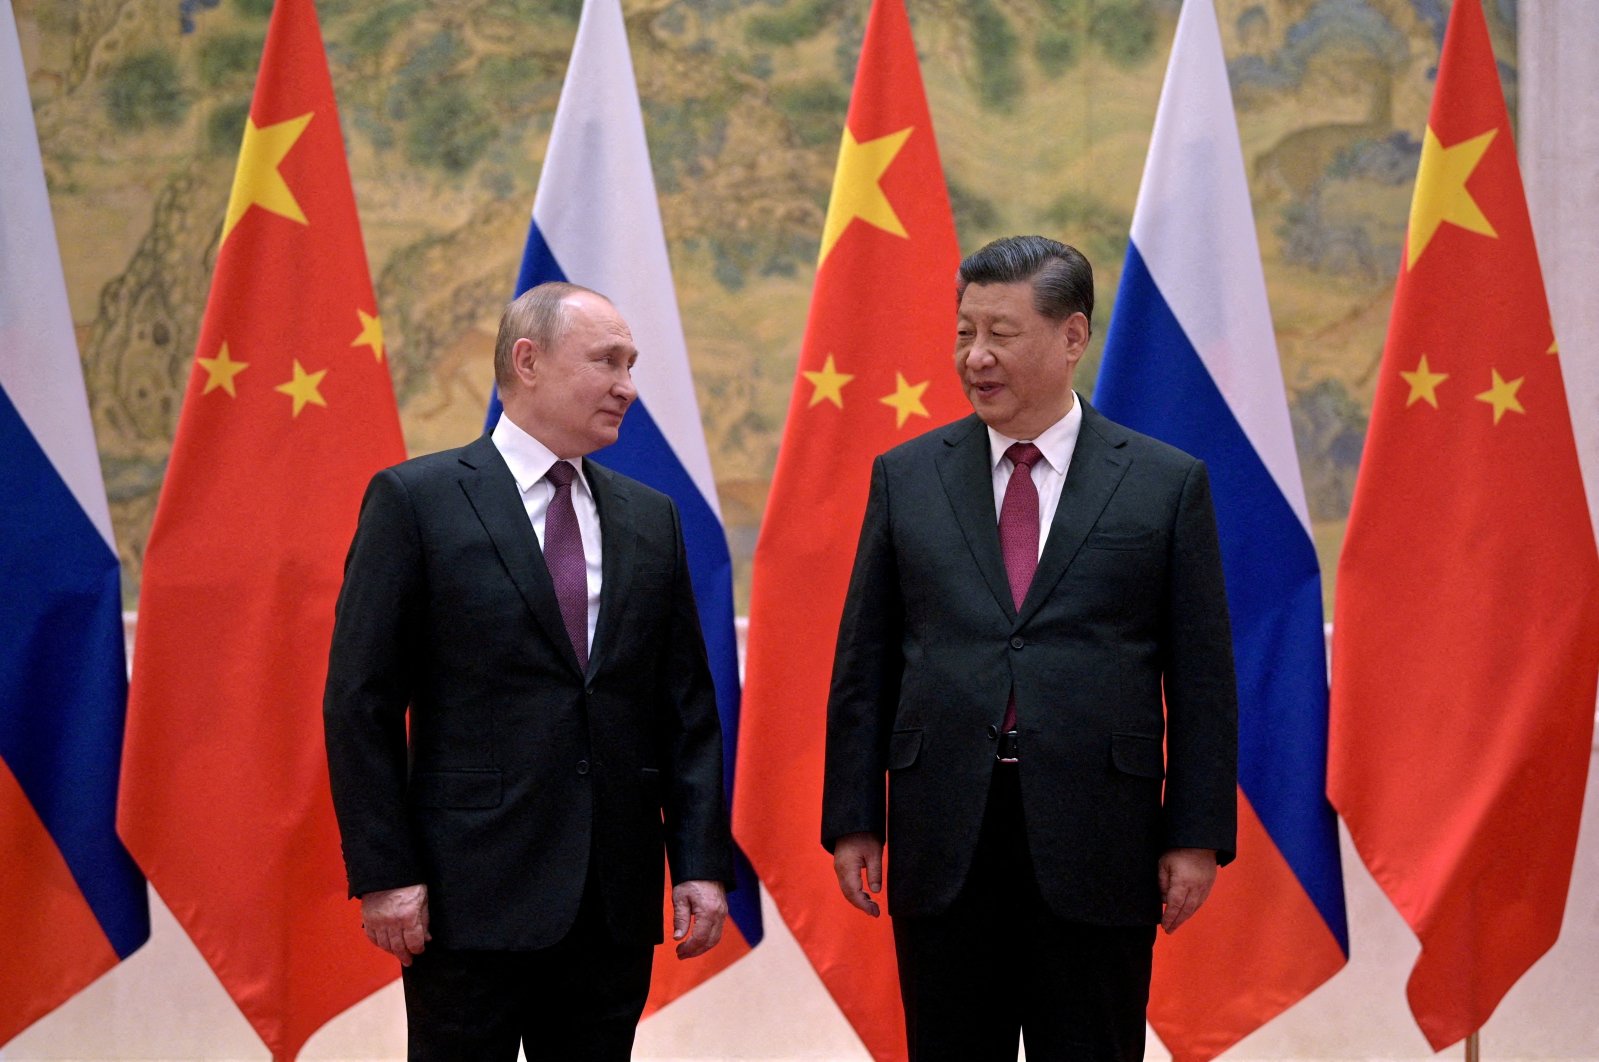 Russian President Vladimir Putin (L) and Chinese President Xi Jinping during a meeting in Beijing, China, Feb. 4, 2022. (Reuters Photo)